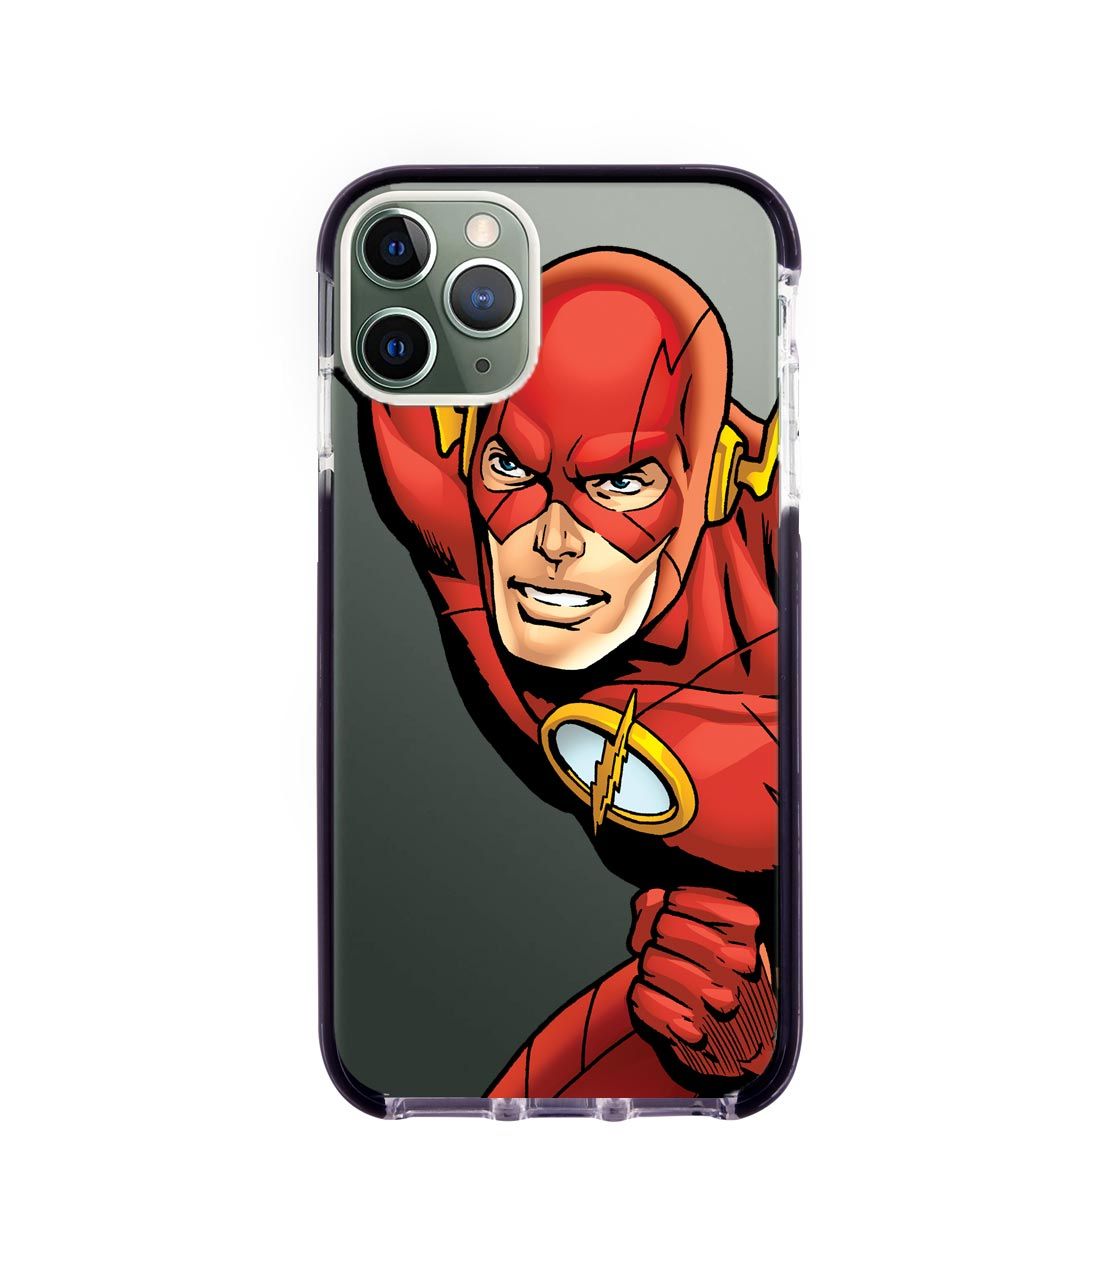 Fierce Flash - Extreme Phone Case for iPhone 11 Pro